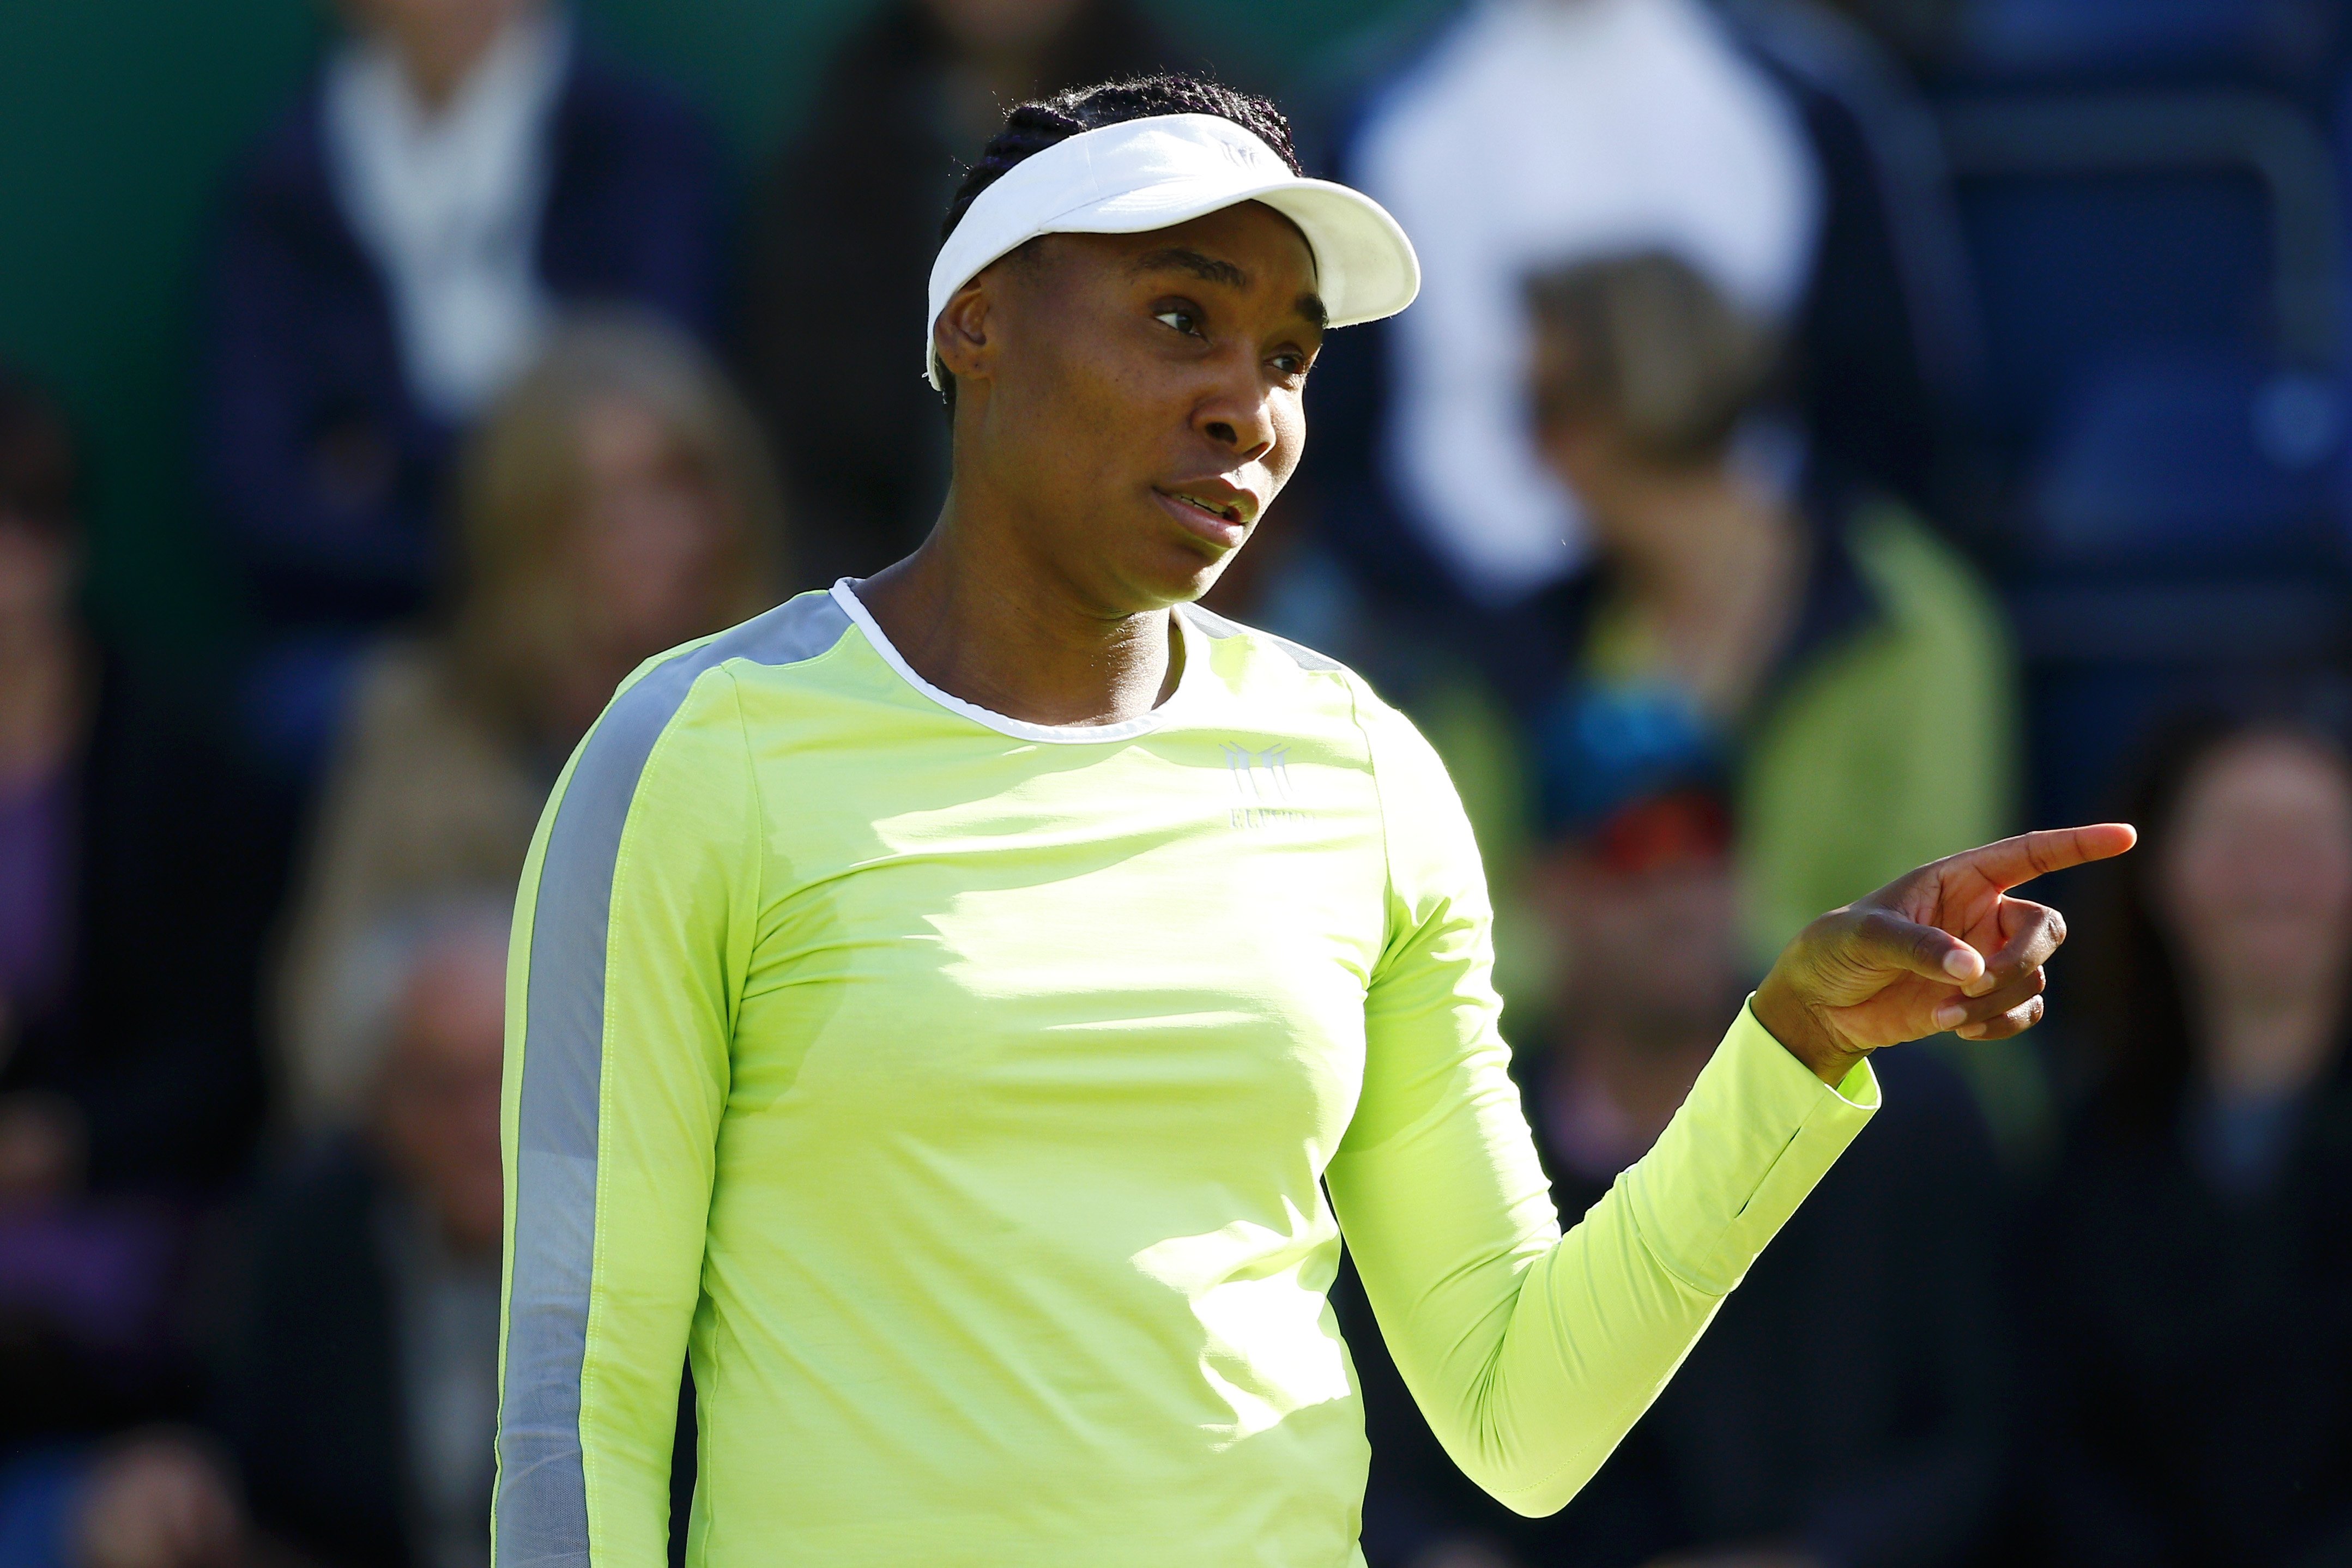 Venus Williams plays at the Nature Valley Classic at Edgbaston Priory Club on June 20, 2019 in Birmingham, United Kingdom. | Source: Getty Images